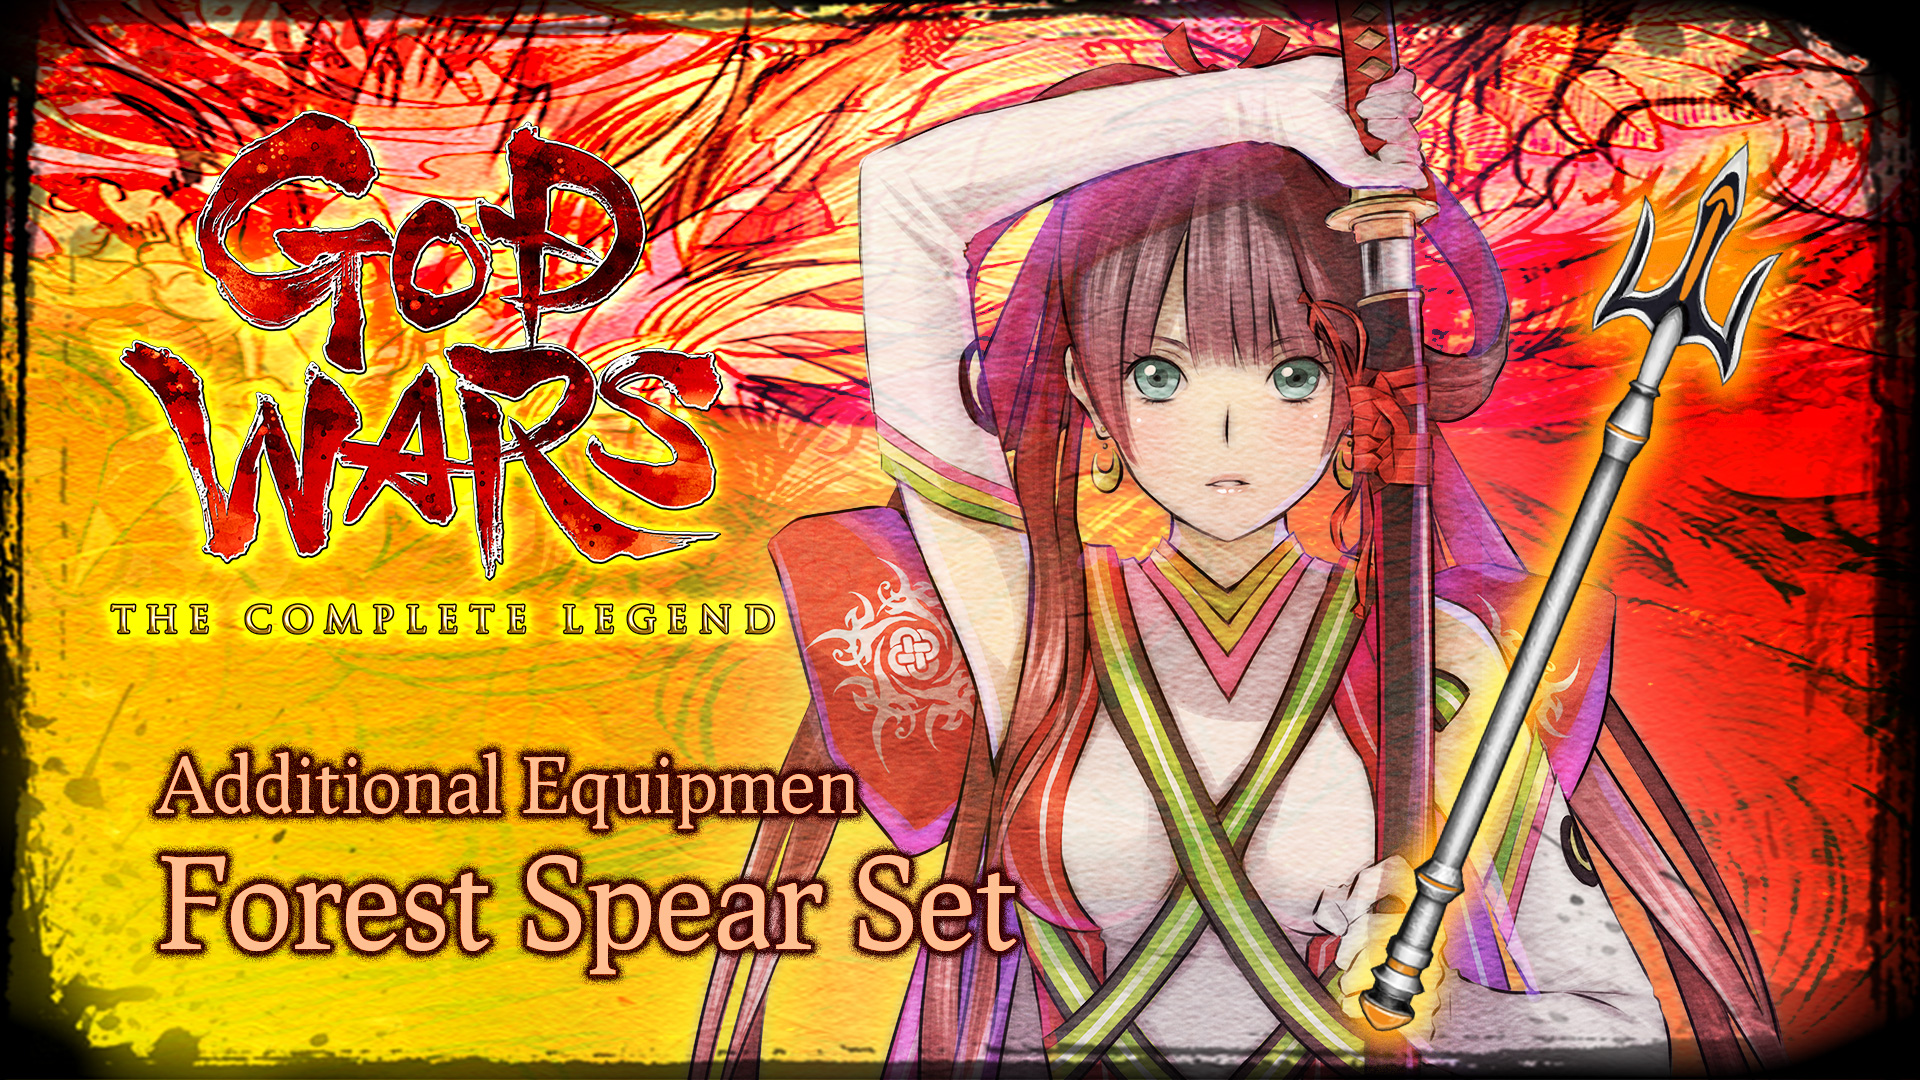 Additional Equipment: Forest Spear Set